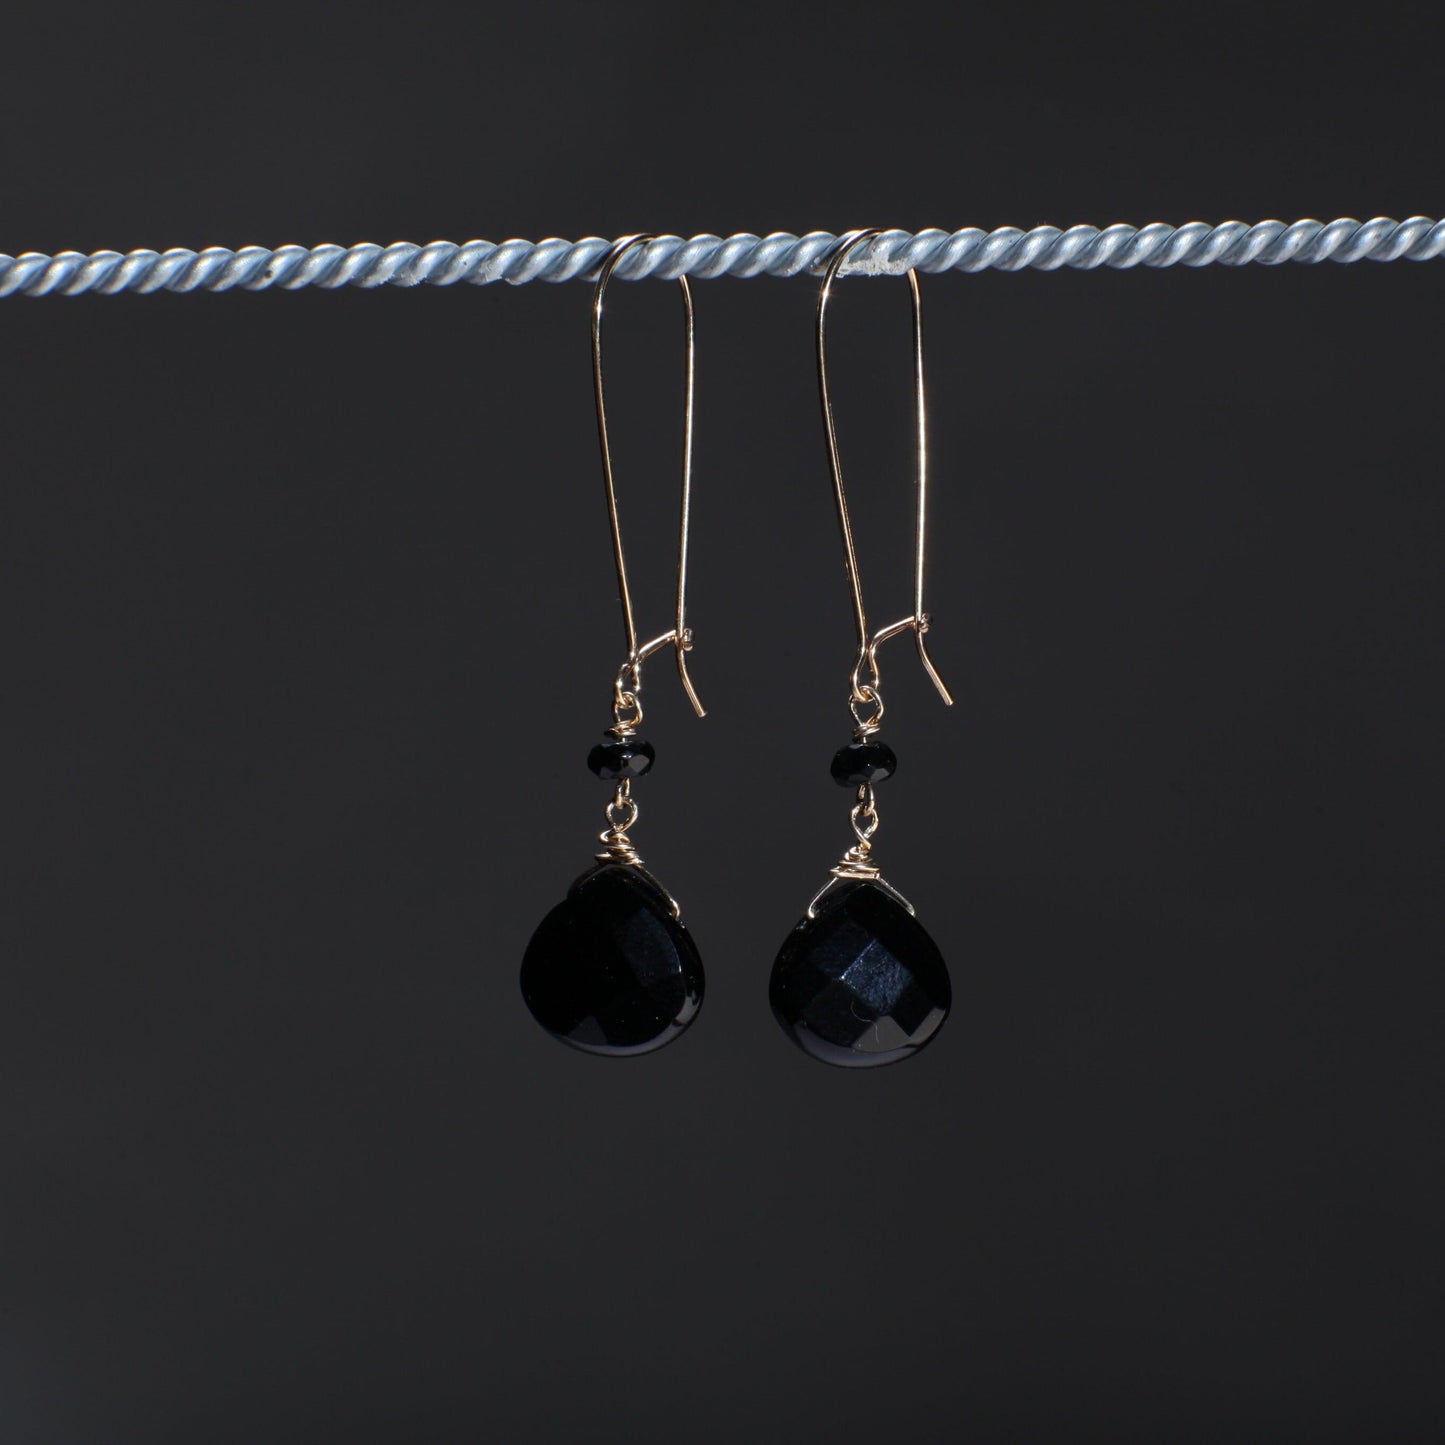 Black Onyx Faceted Teardrop Dangling Wire Wrapped Kidney Earwire in 14K Gold Filled, Also Available in 925 Sterling Silver